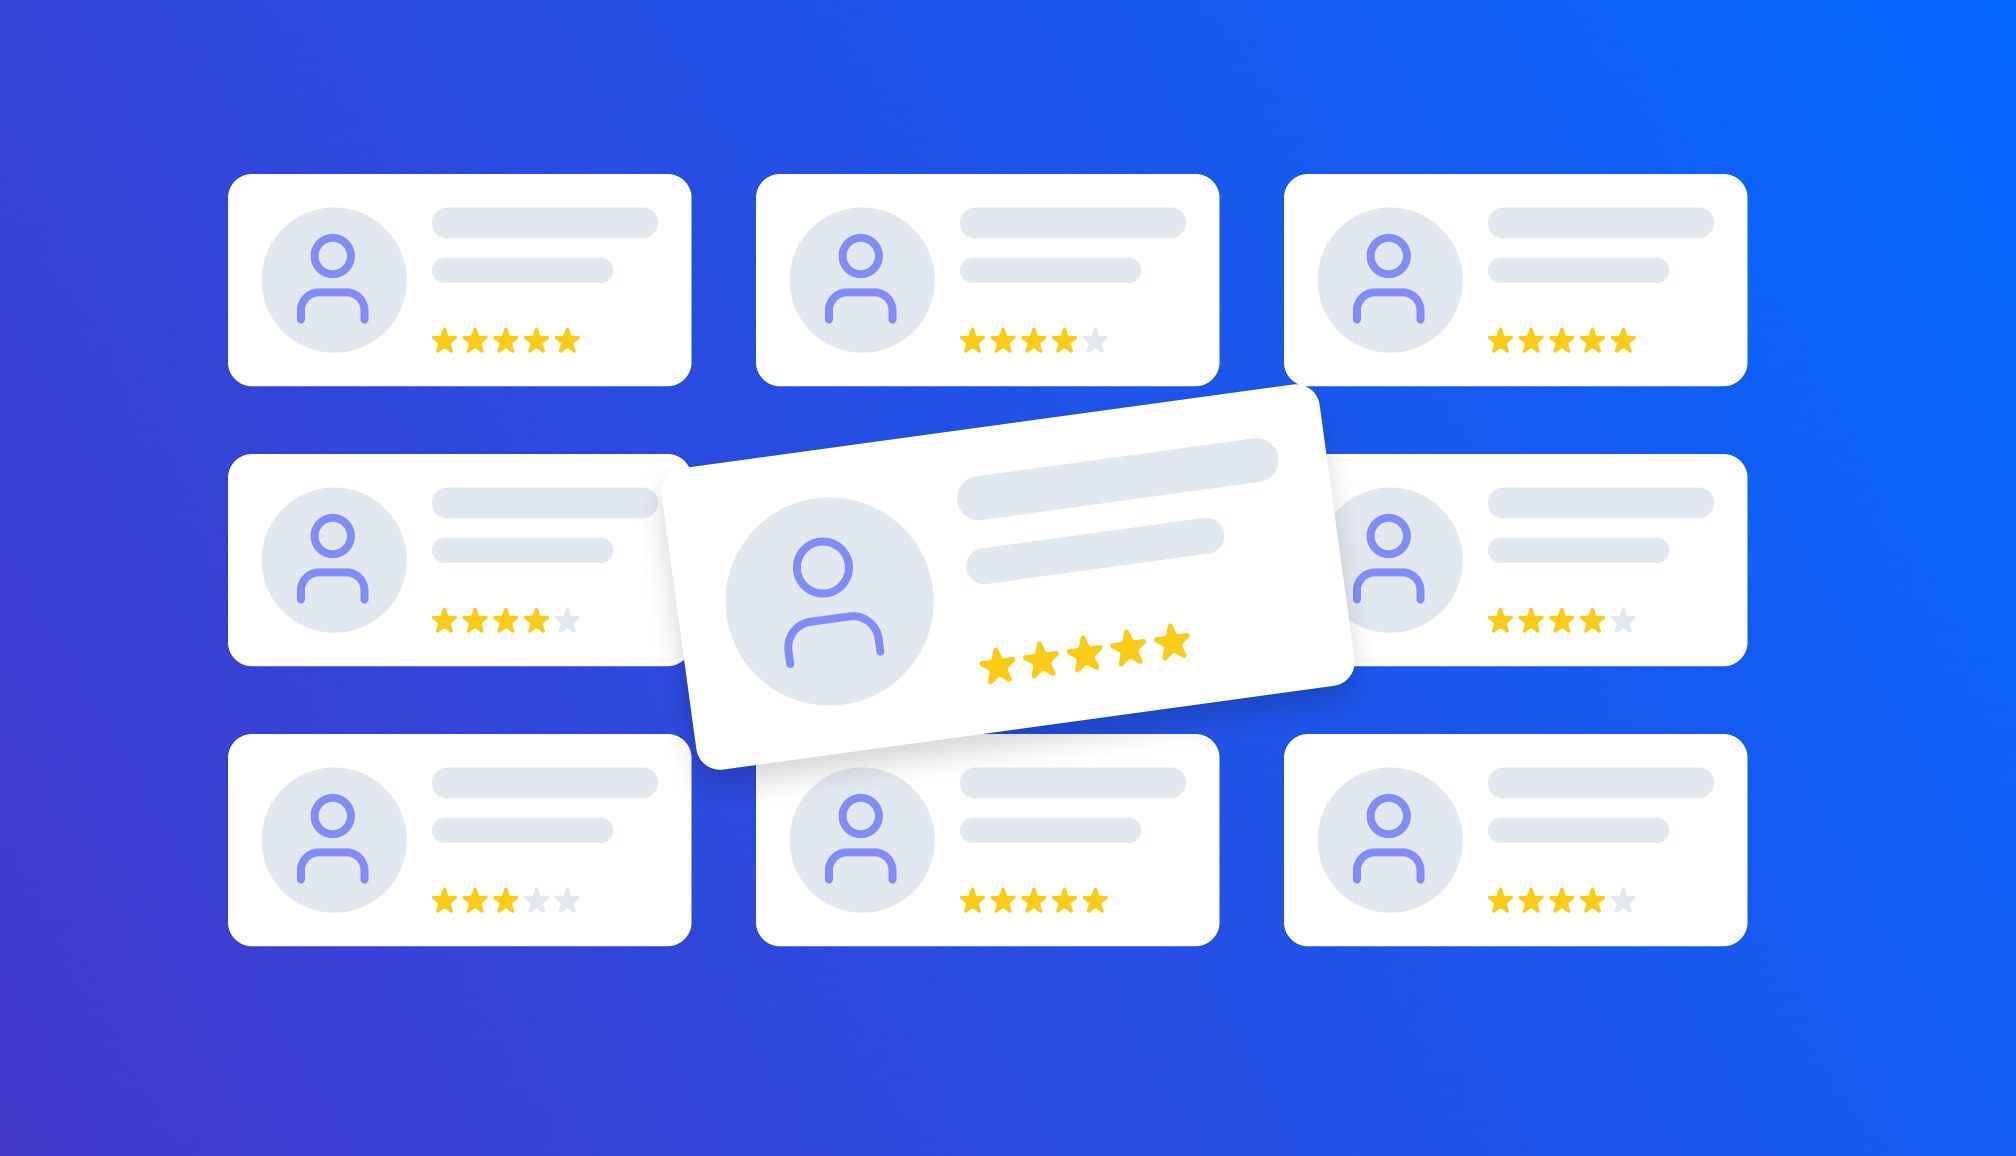 Group of testimonials with star ratings